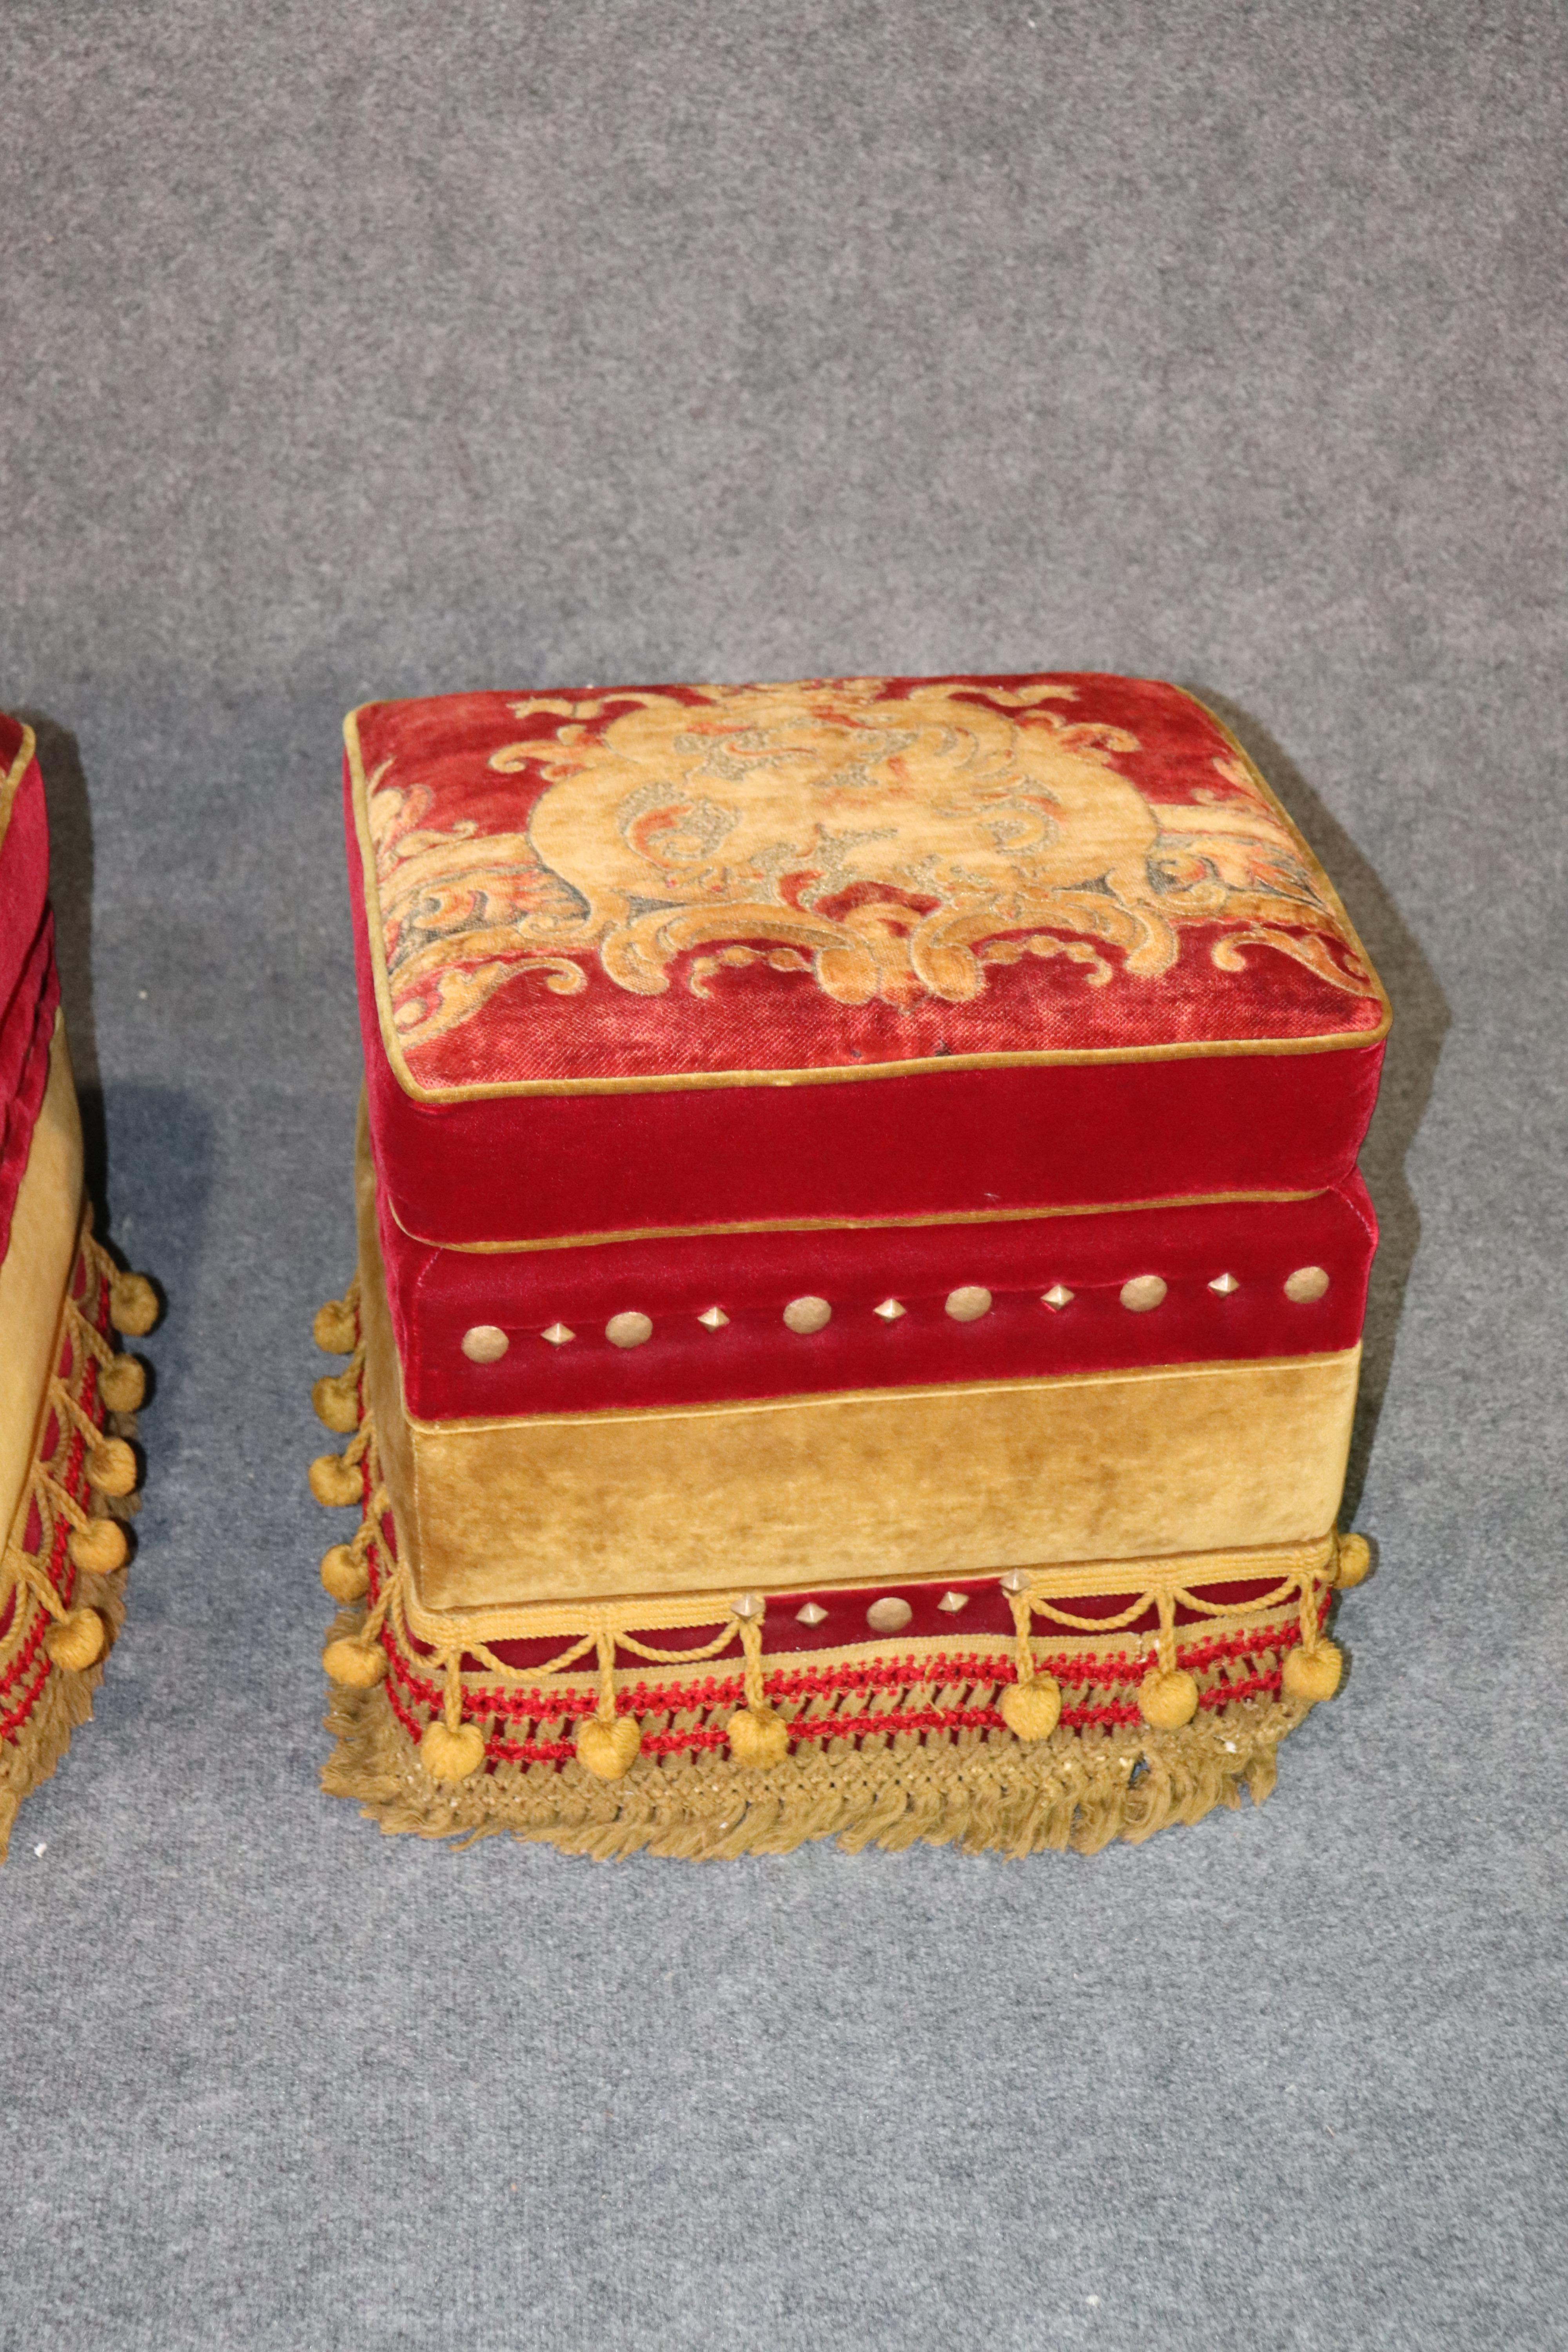 Upholstery Pair of Rolling Embroidered Tassled Hollywood Regency Squarish Ottomans Stools